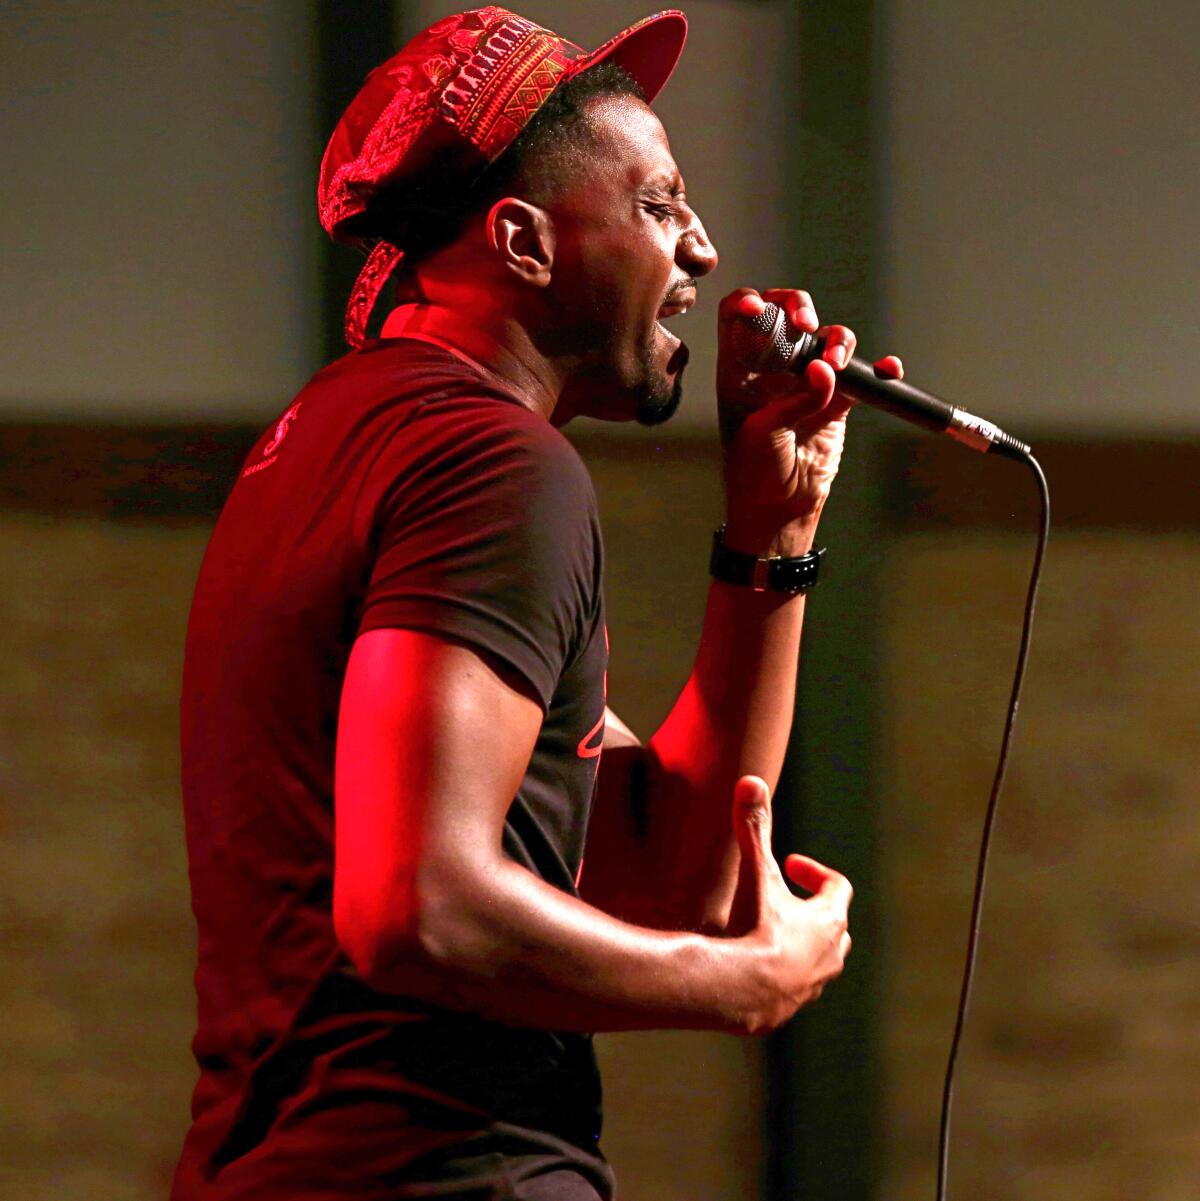 A man in a cap sings passionately into a microphone.